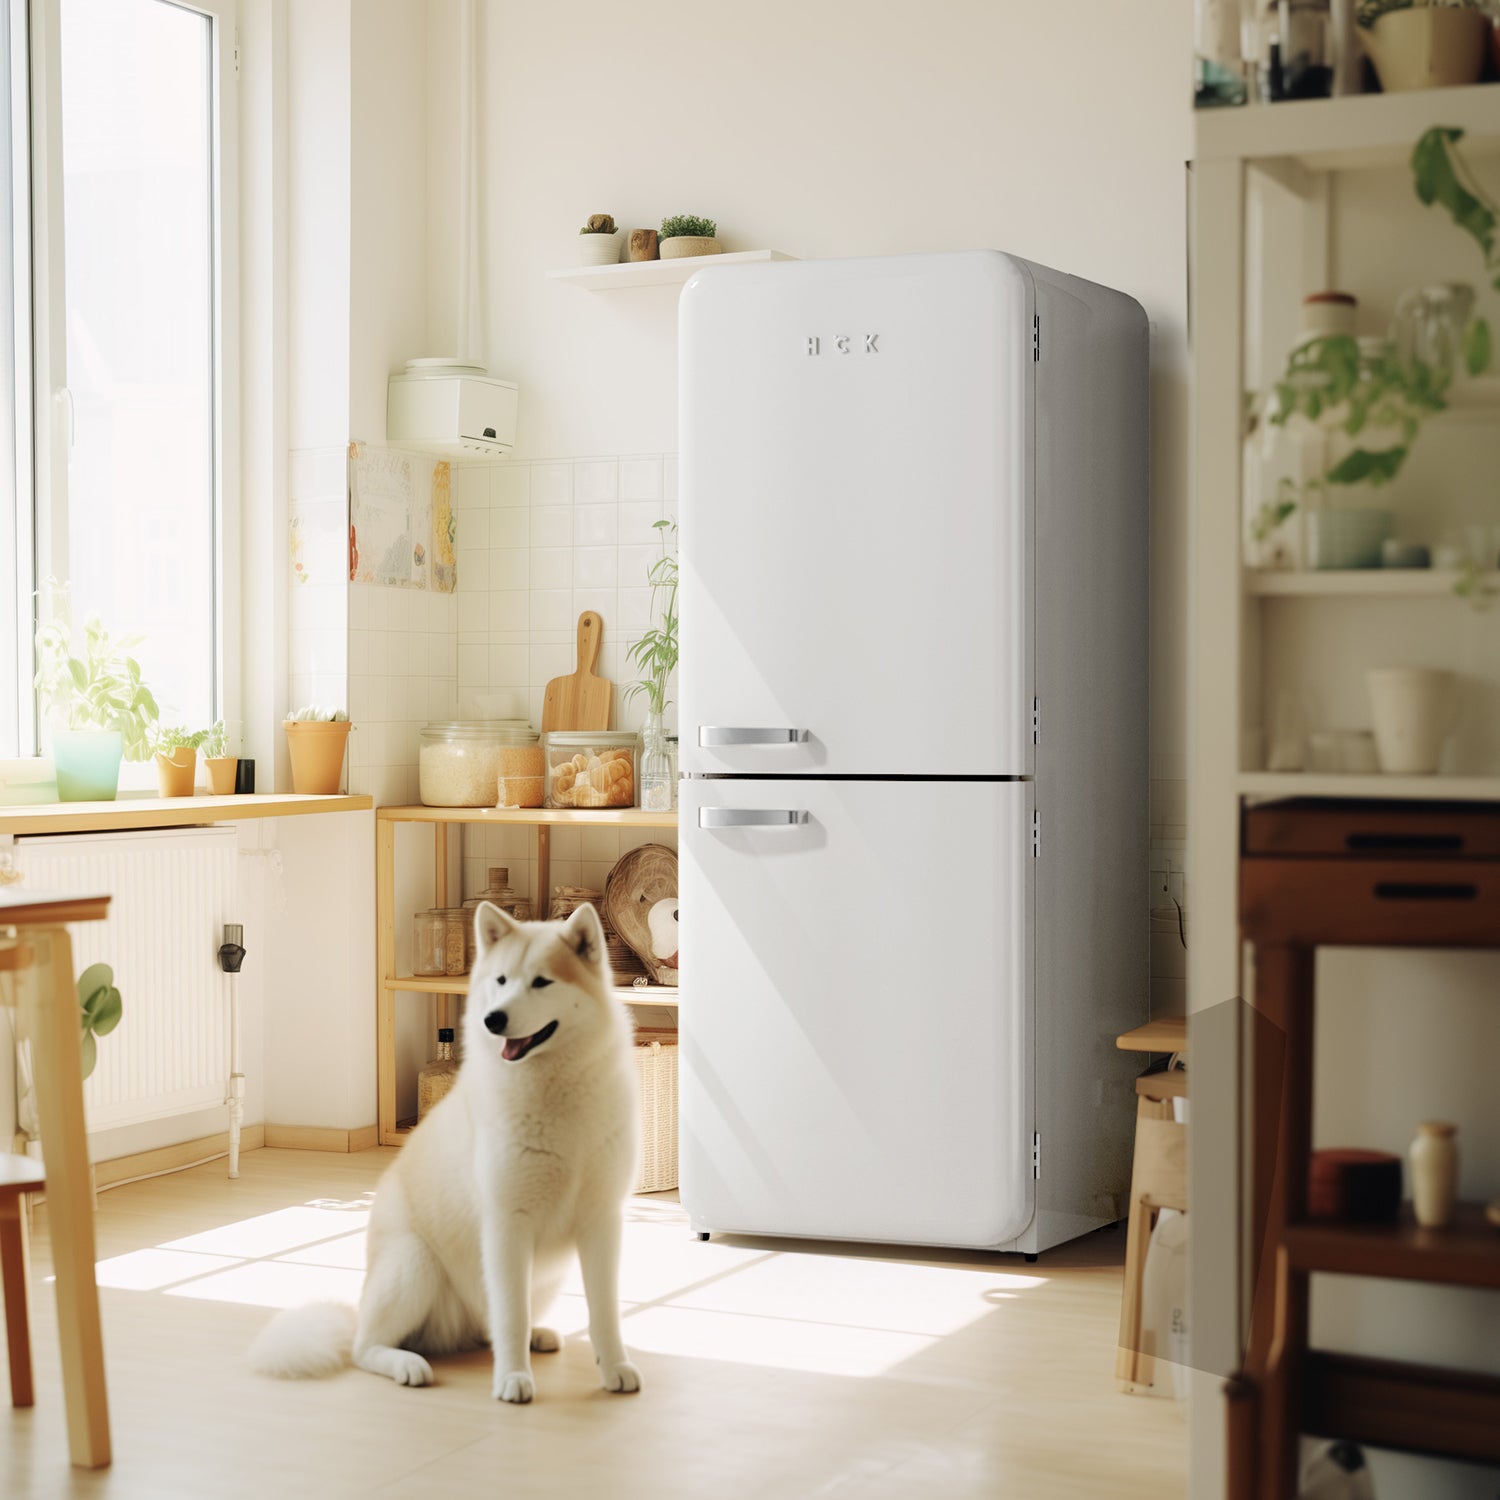 Side view of a retro-style kitchen setting with the 14.1 Cu Ft Bottom Freezer Iconic Retro Fridge installed in a suitable place. A dog is standing in front of the retro fridge, adding a charming touch to the scene